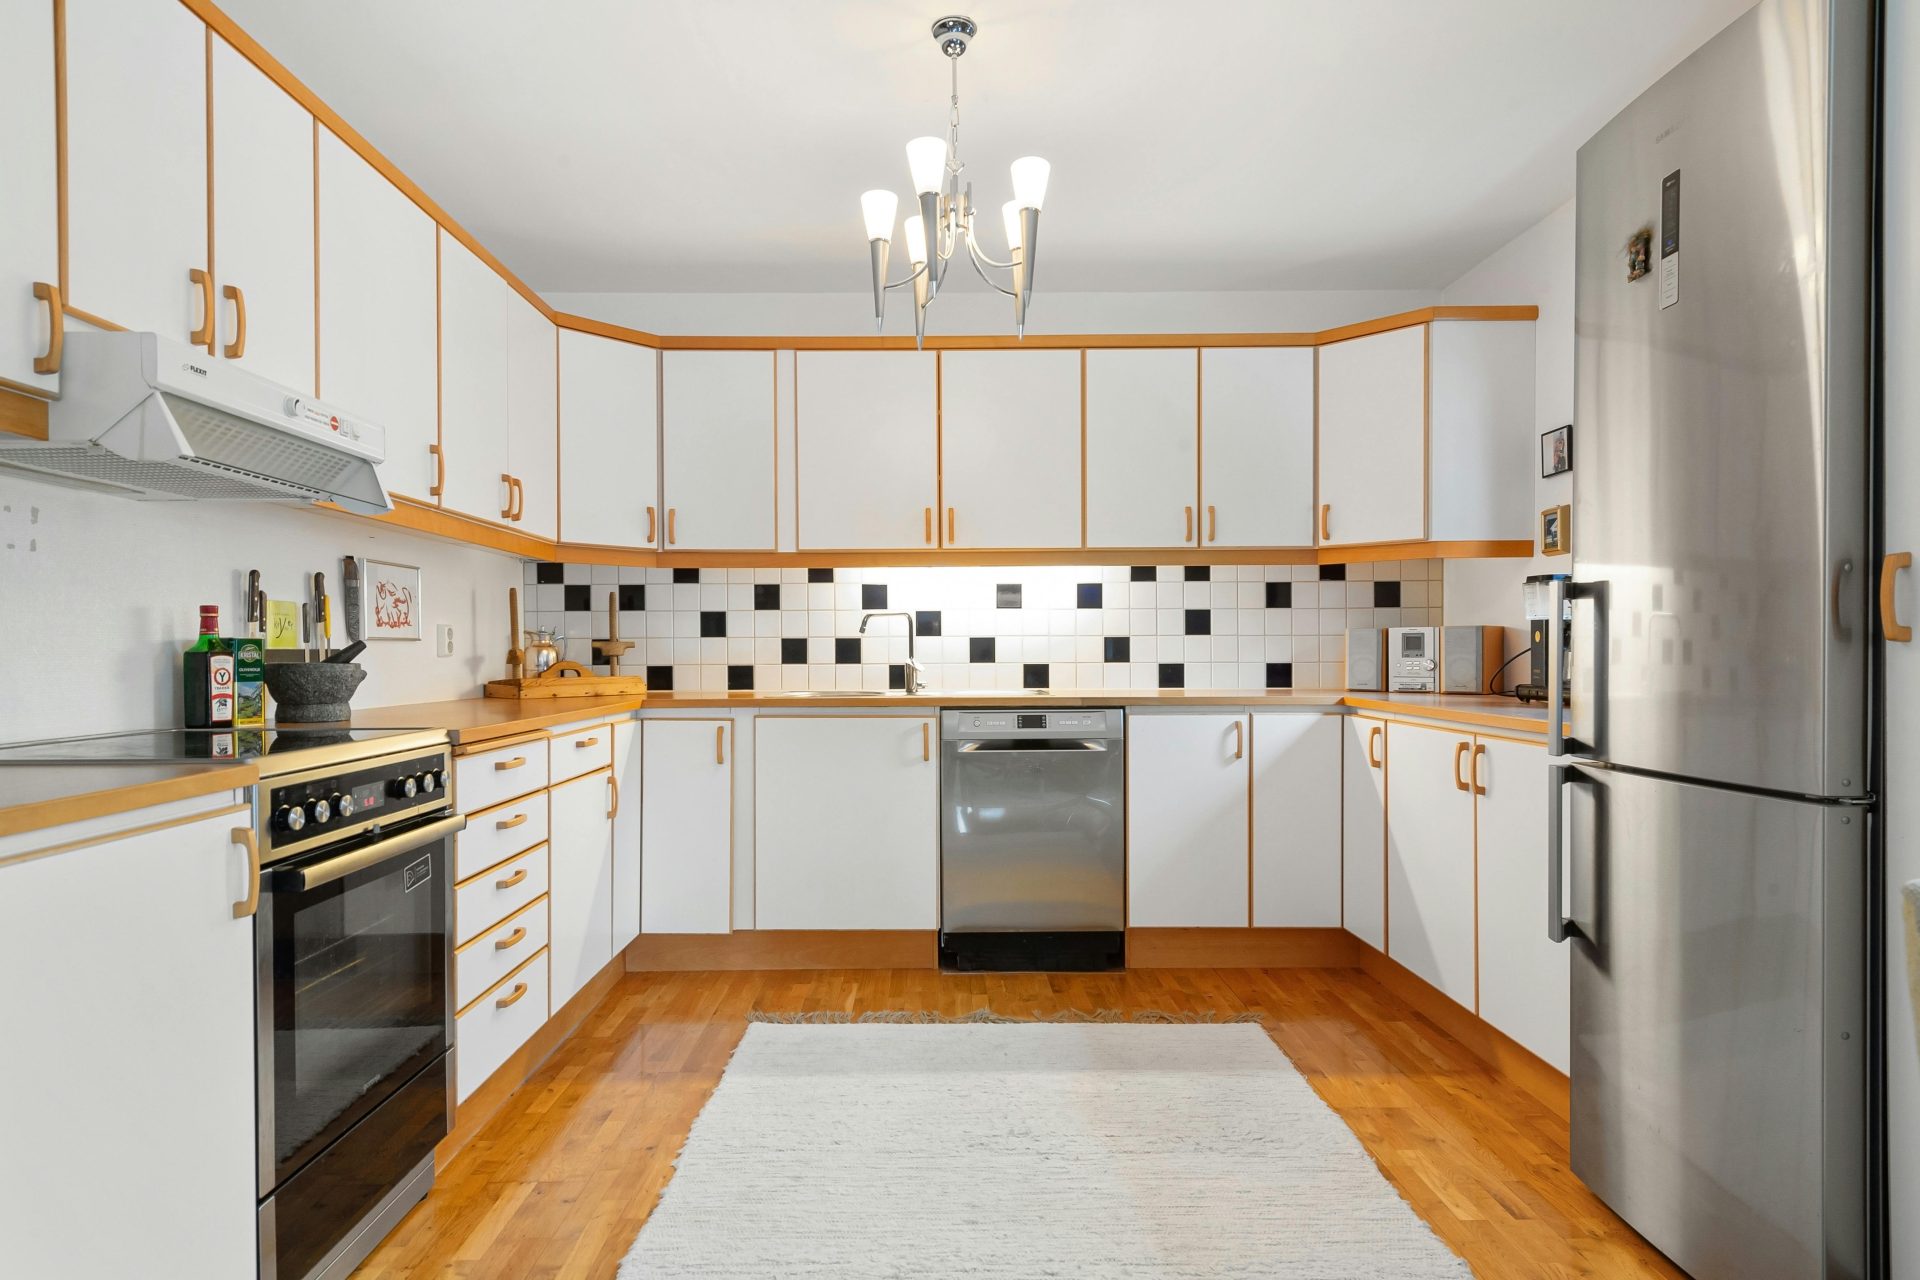 Introduction to Galley Kitchen Design